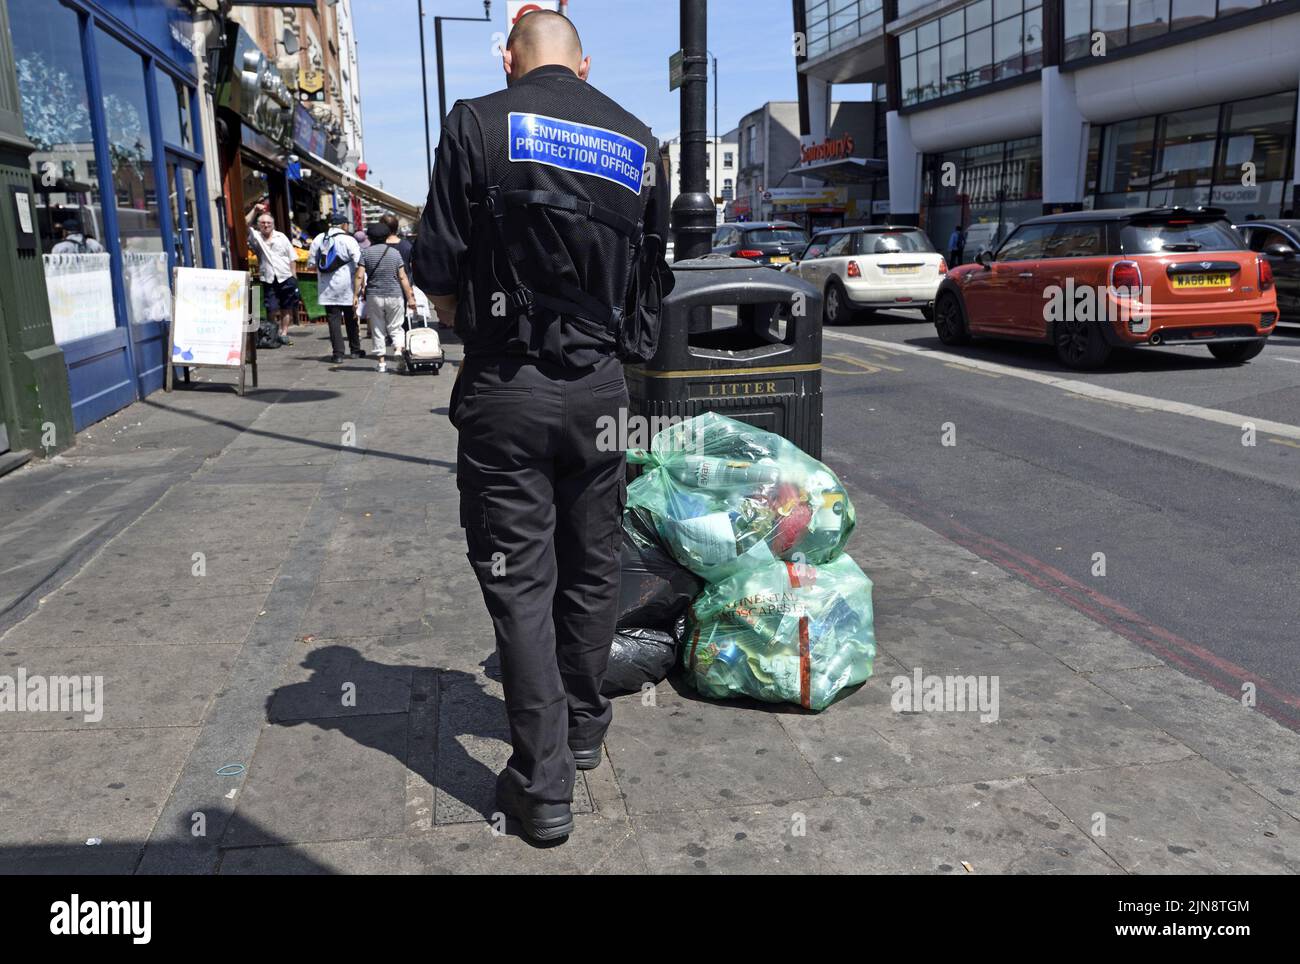 London, England, UK. Environmental Protection Officer and a pile of rubbish left by a litter bin, Tooting Stock Photo